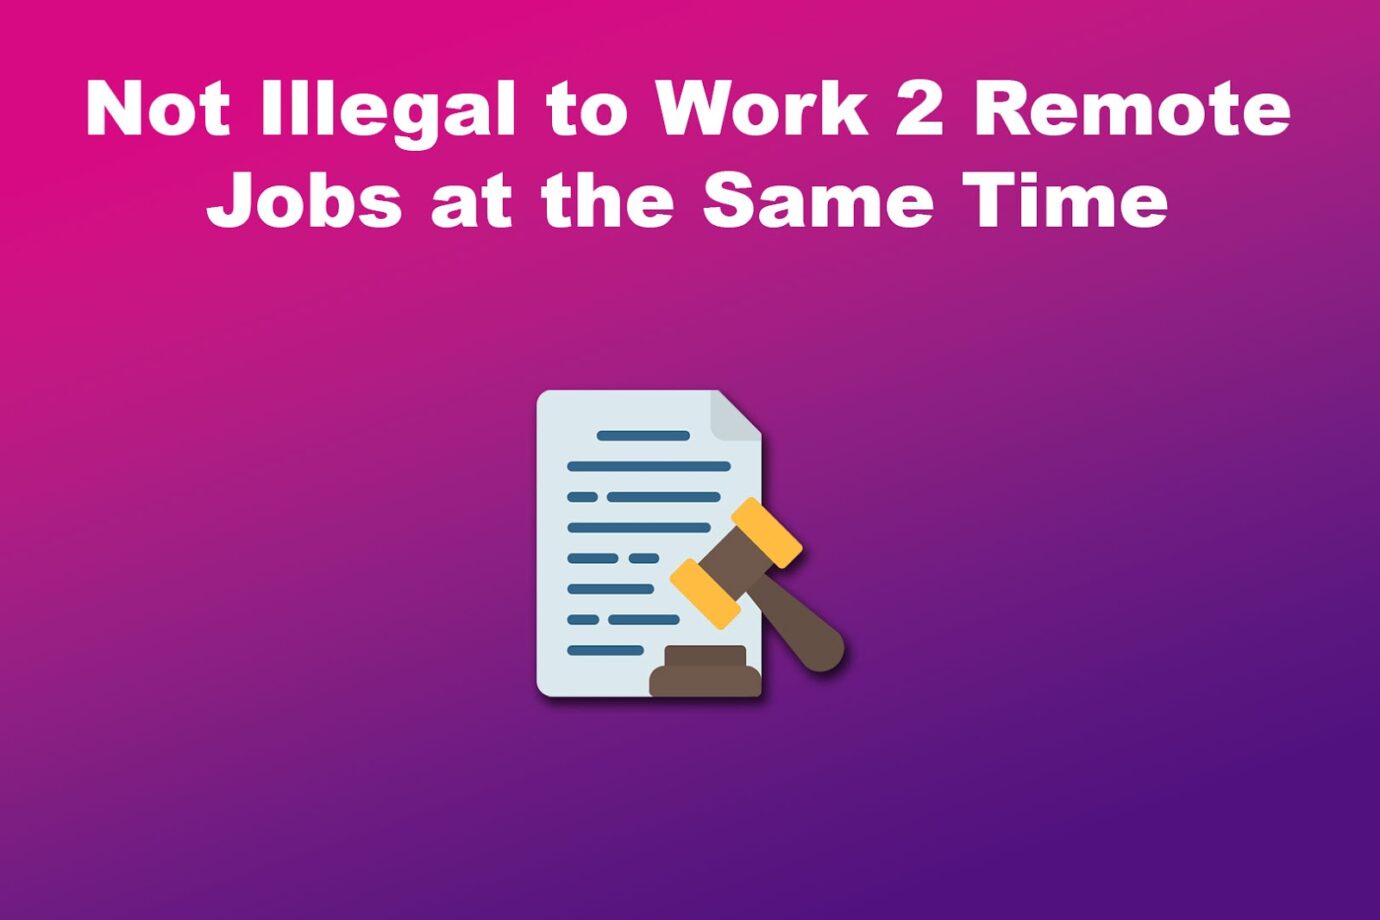 Not Illegal to Work 2 Remote Jobs at the Same Time